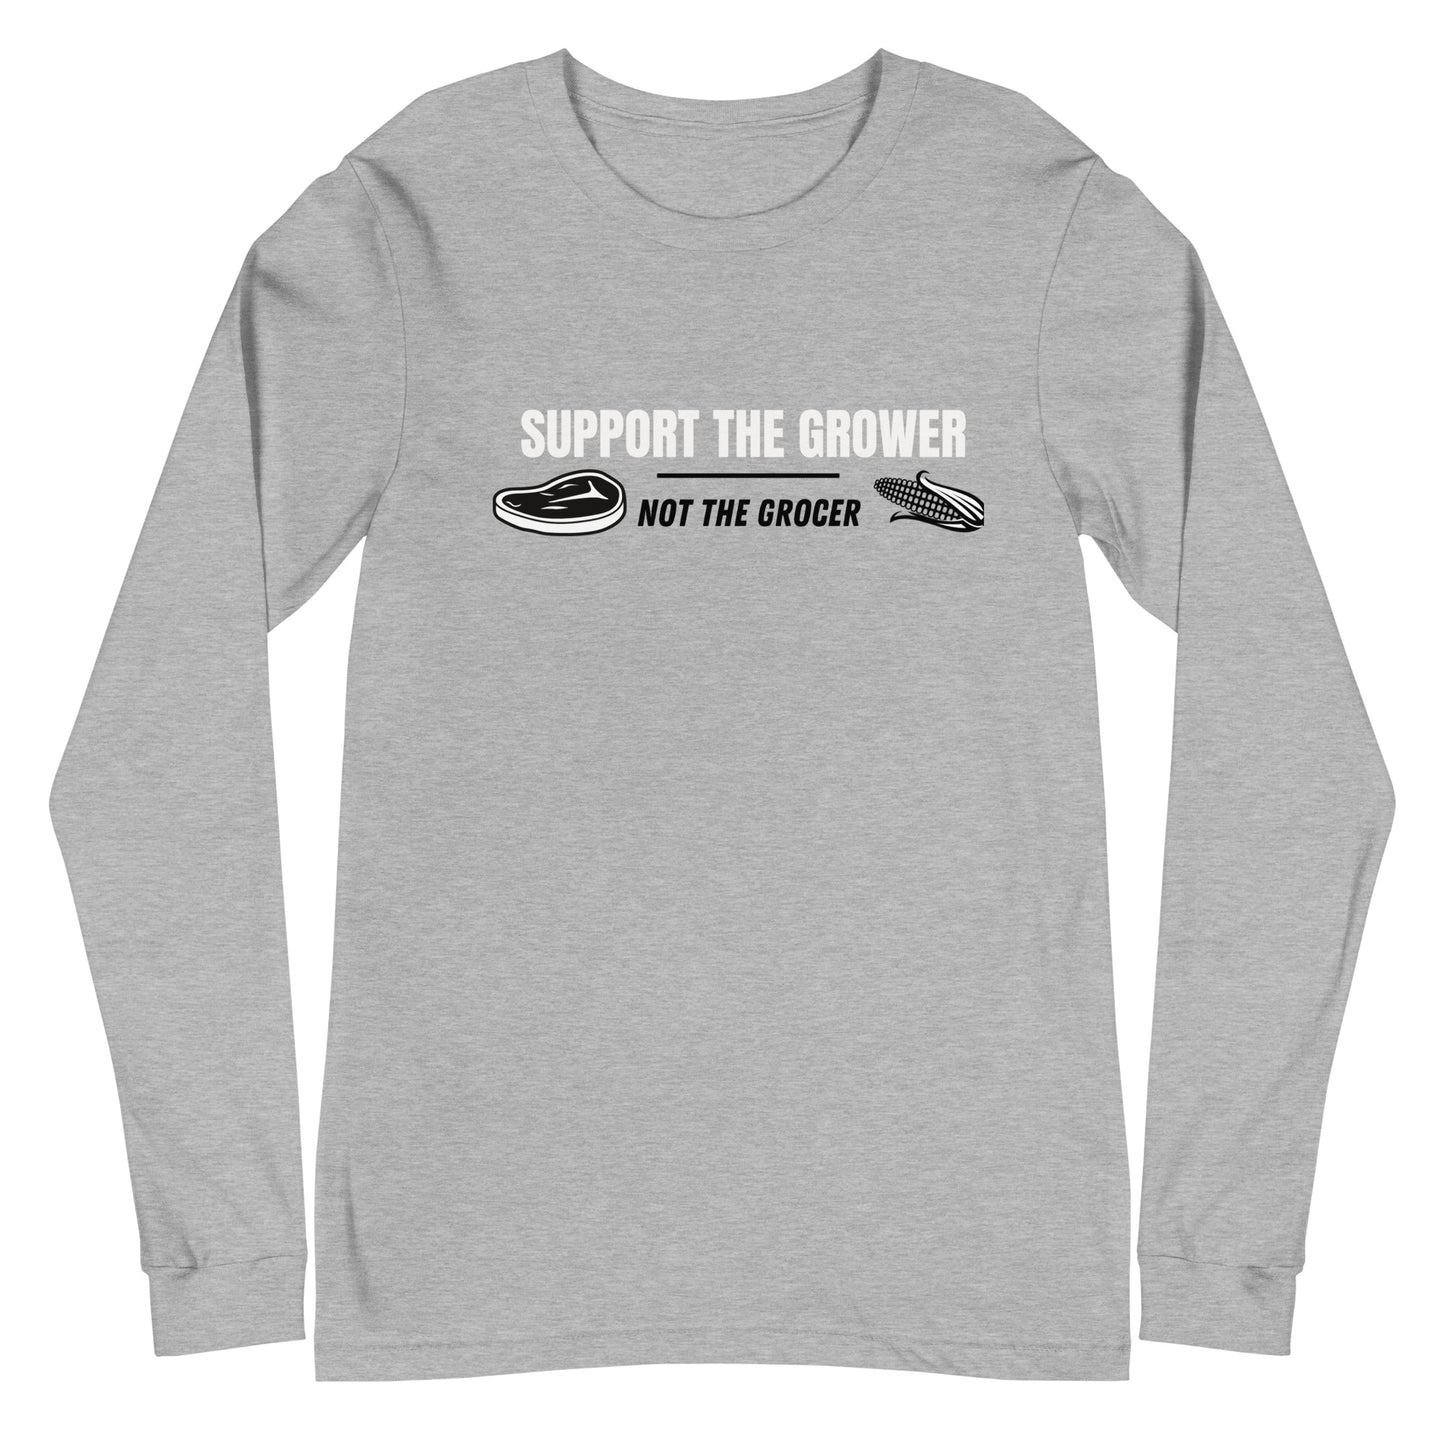 UNISEX LONG SLEEVE- NOT THE GROCER